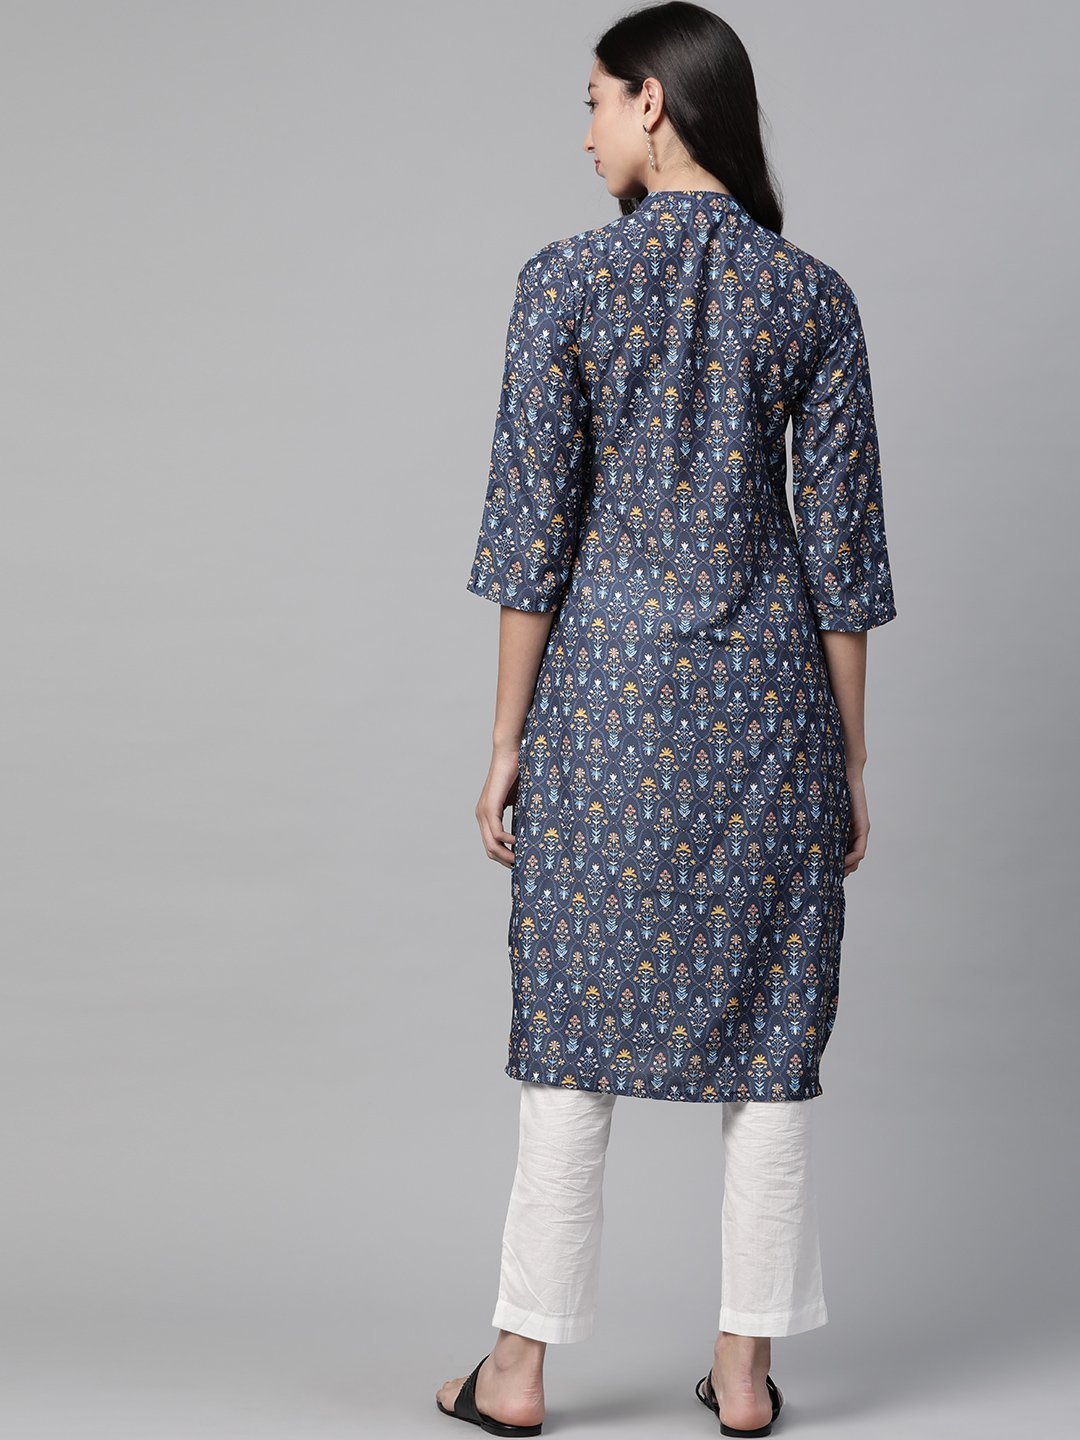 Women's Blue & Yellow Floral Printed Keyhole Neck Floral Kurta - Jompers